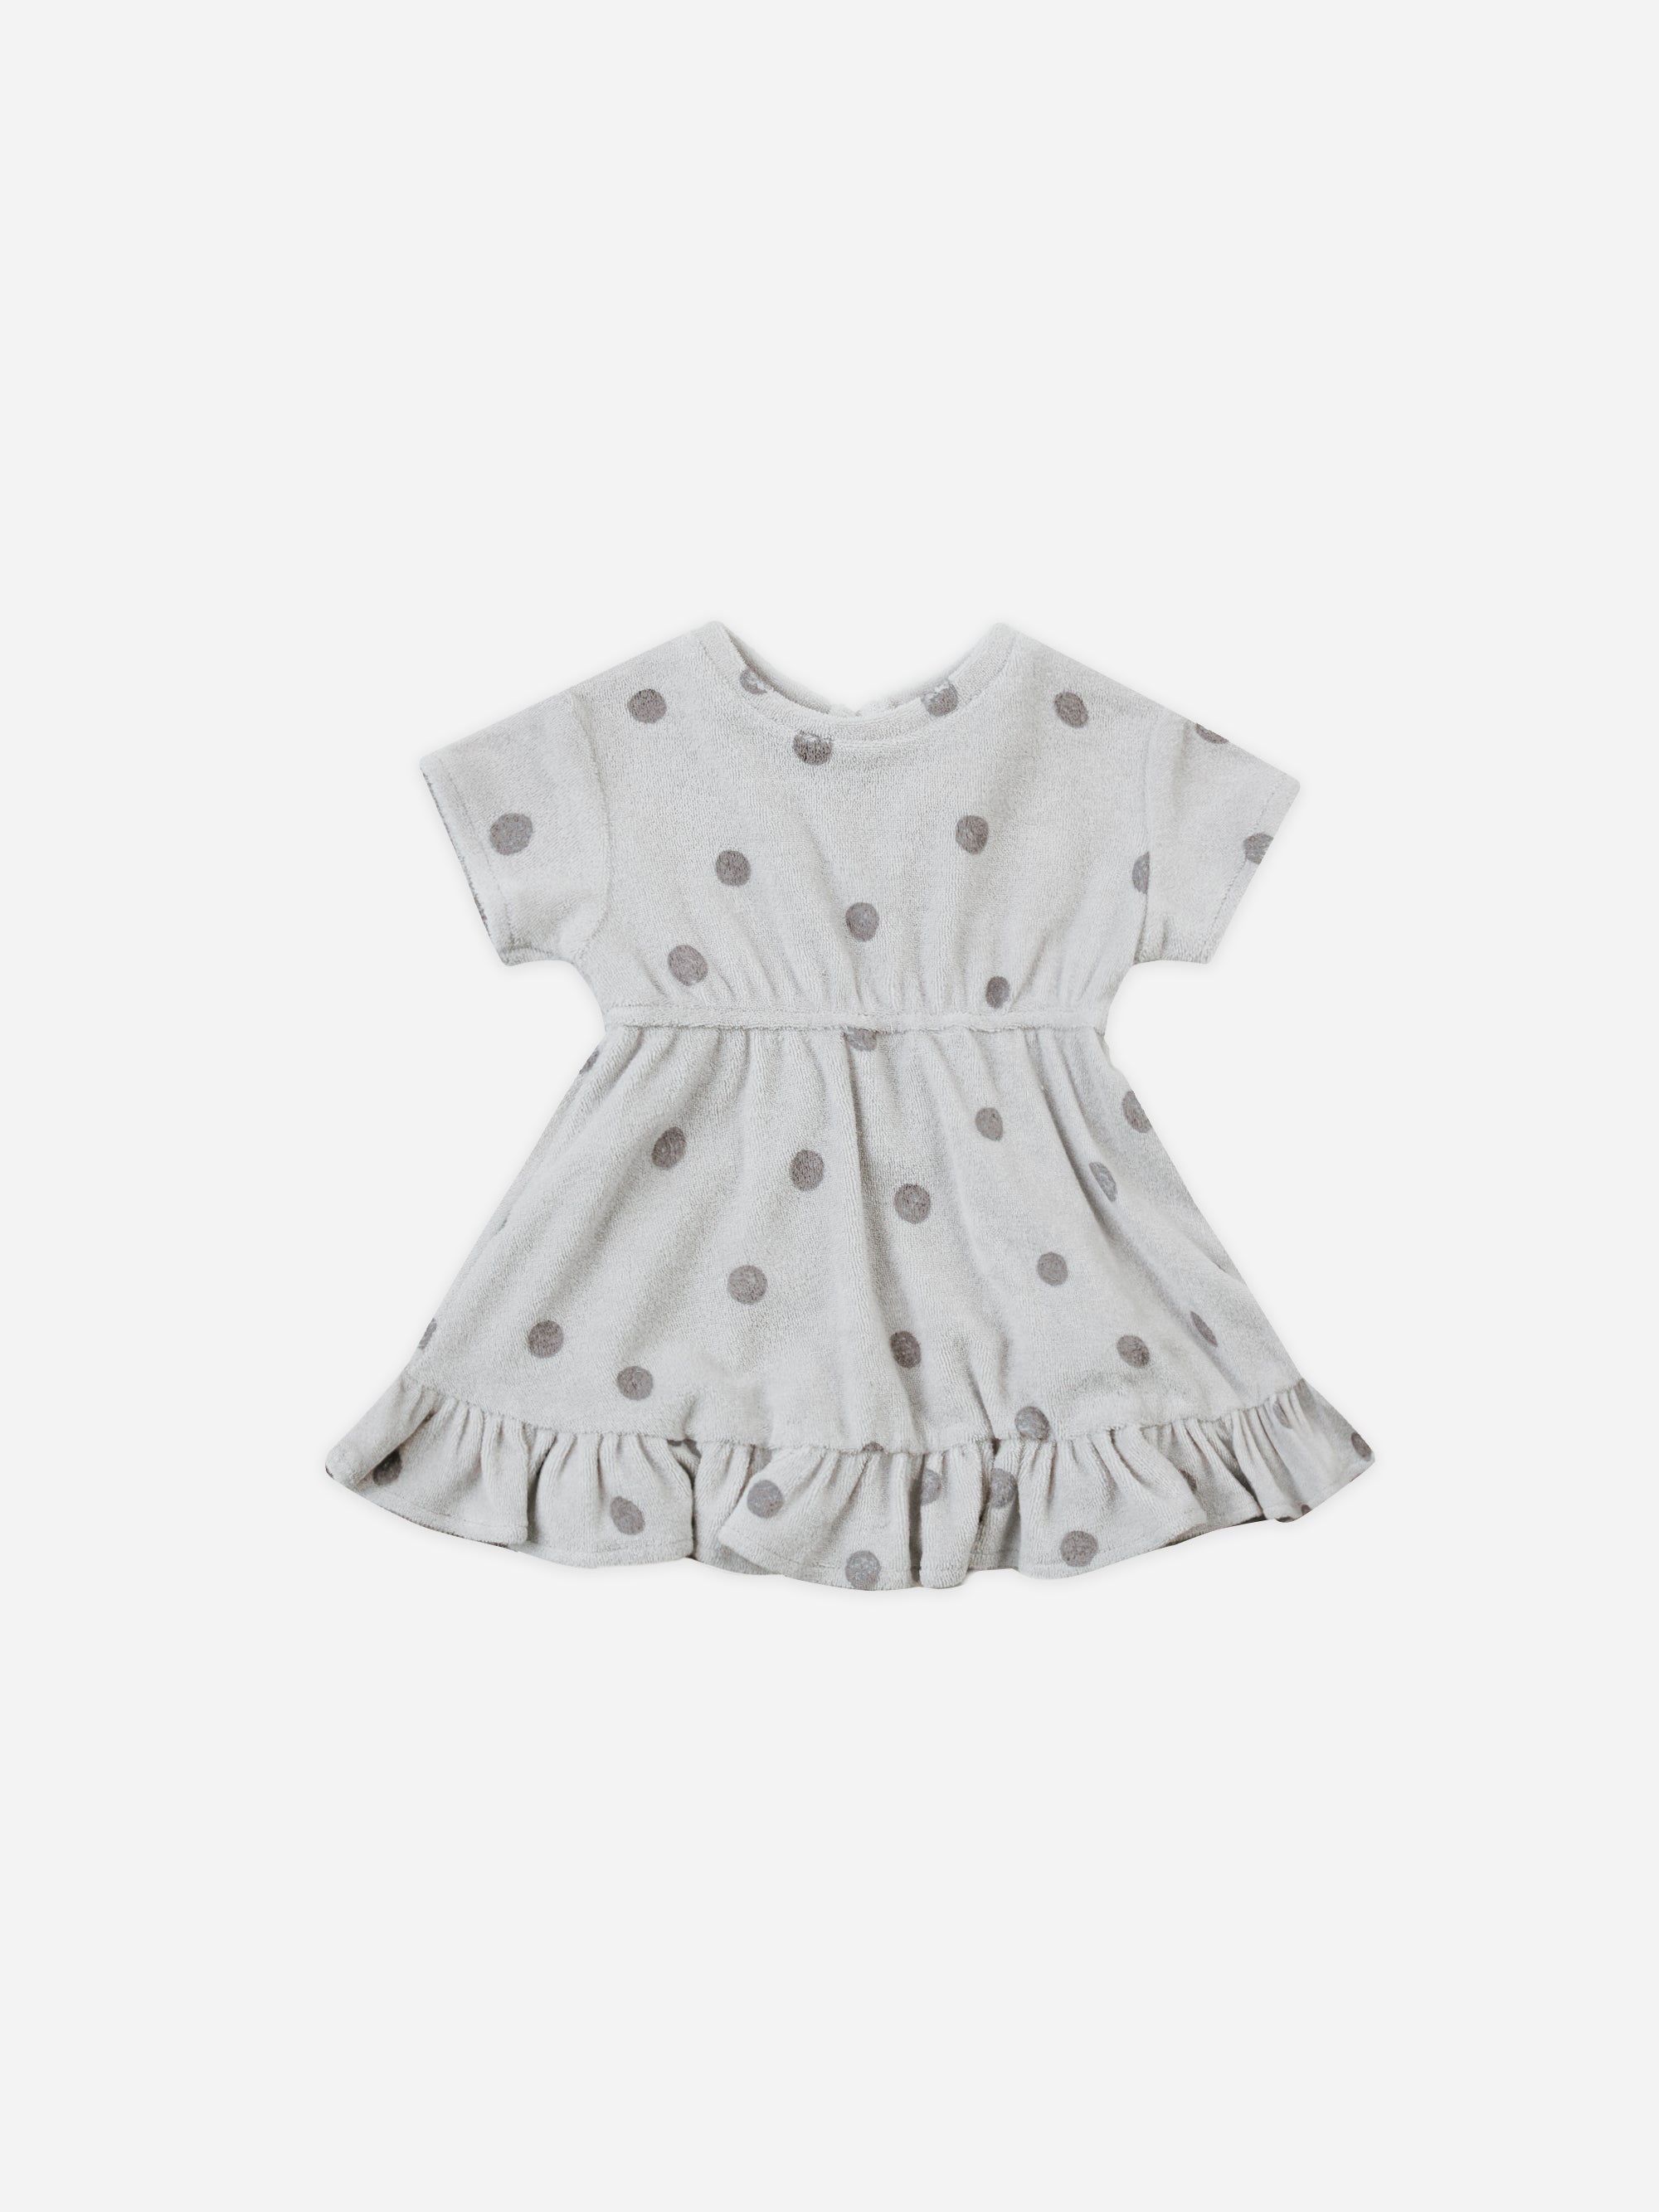 Terry Dress || Polka Dot - Rylee + Cru | Kids Clothes | Trendy Baby Clothes | Modern Infant Outfits |